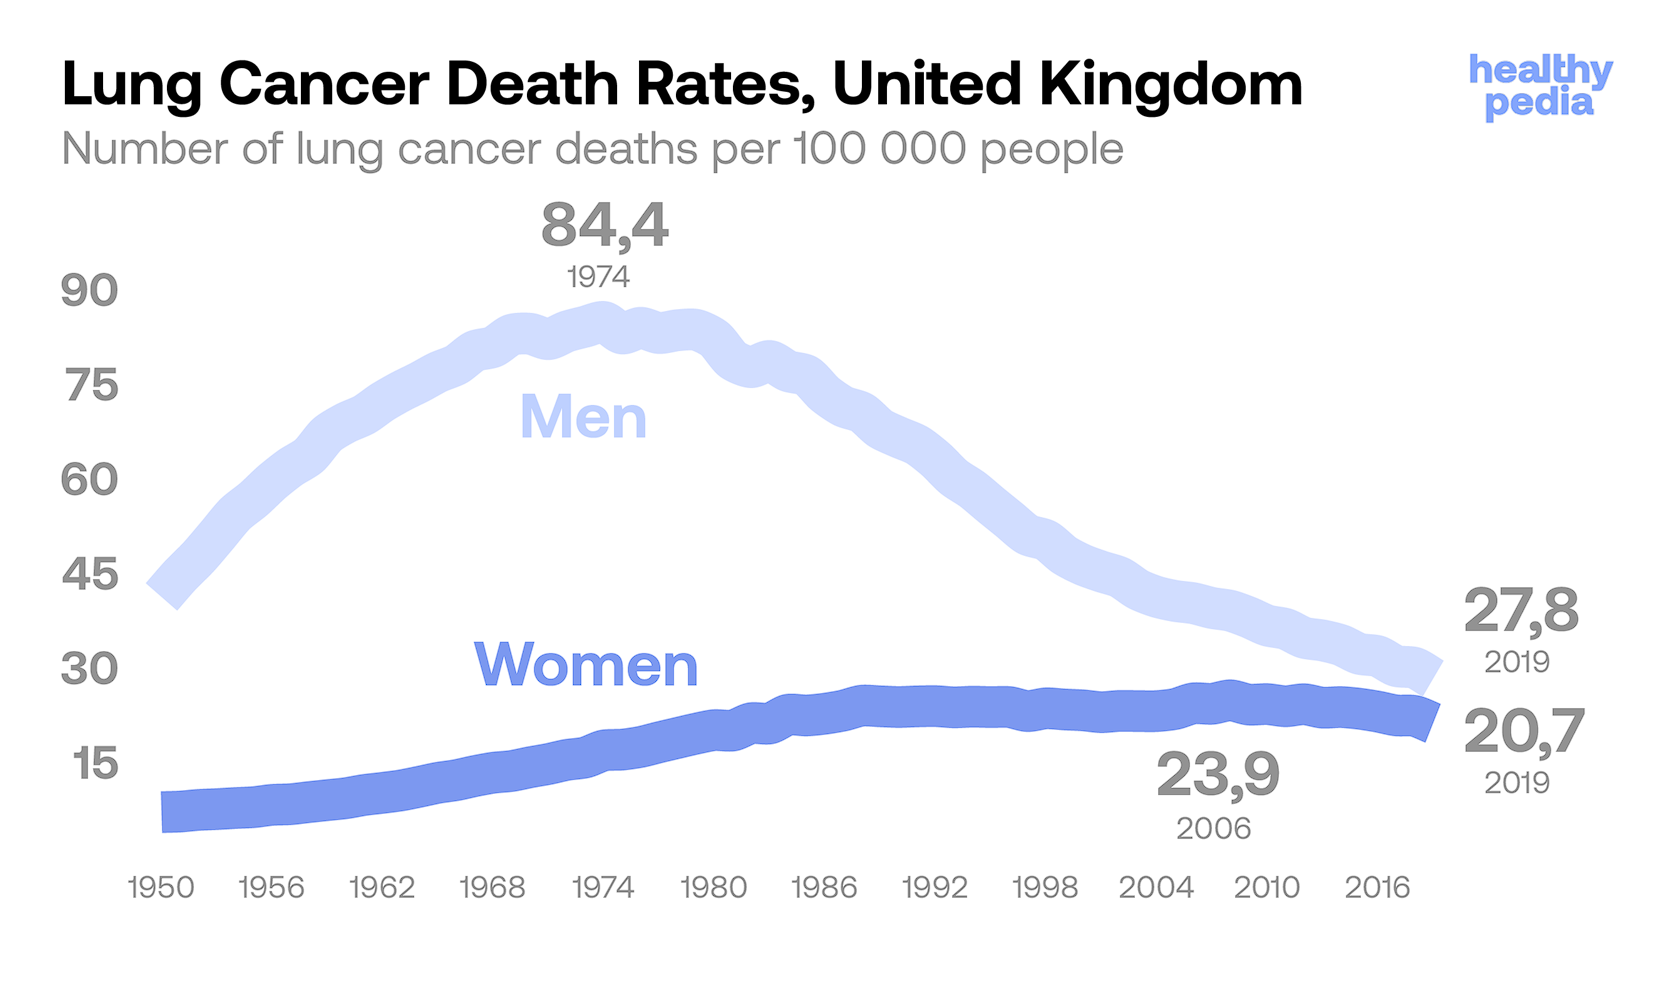 Lung Cancer Death Rates, United Kingdom, stats